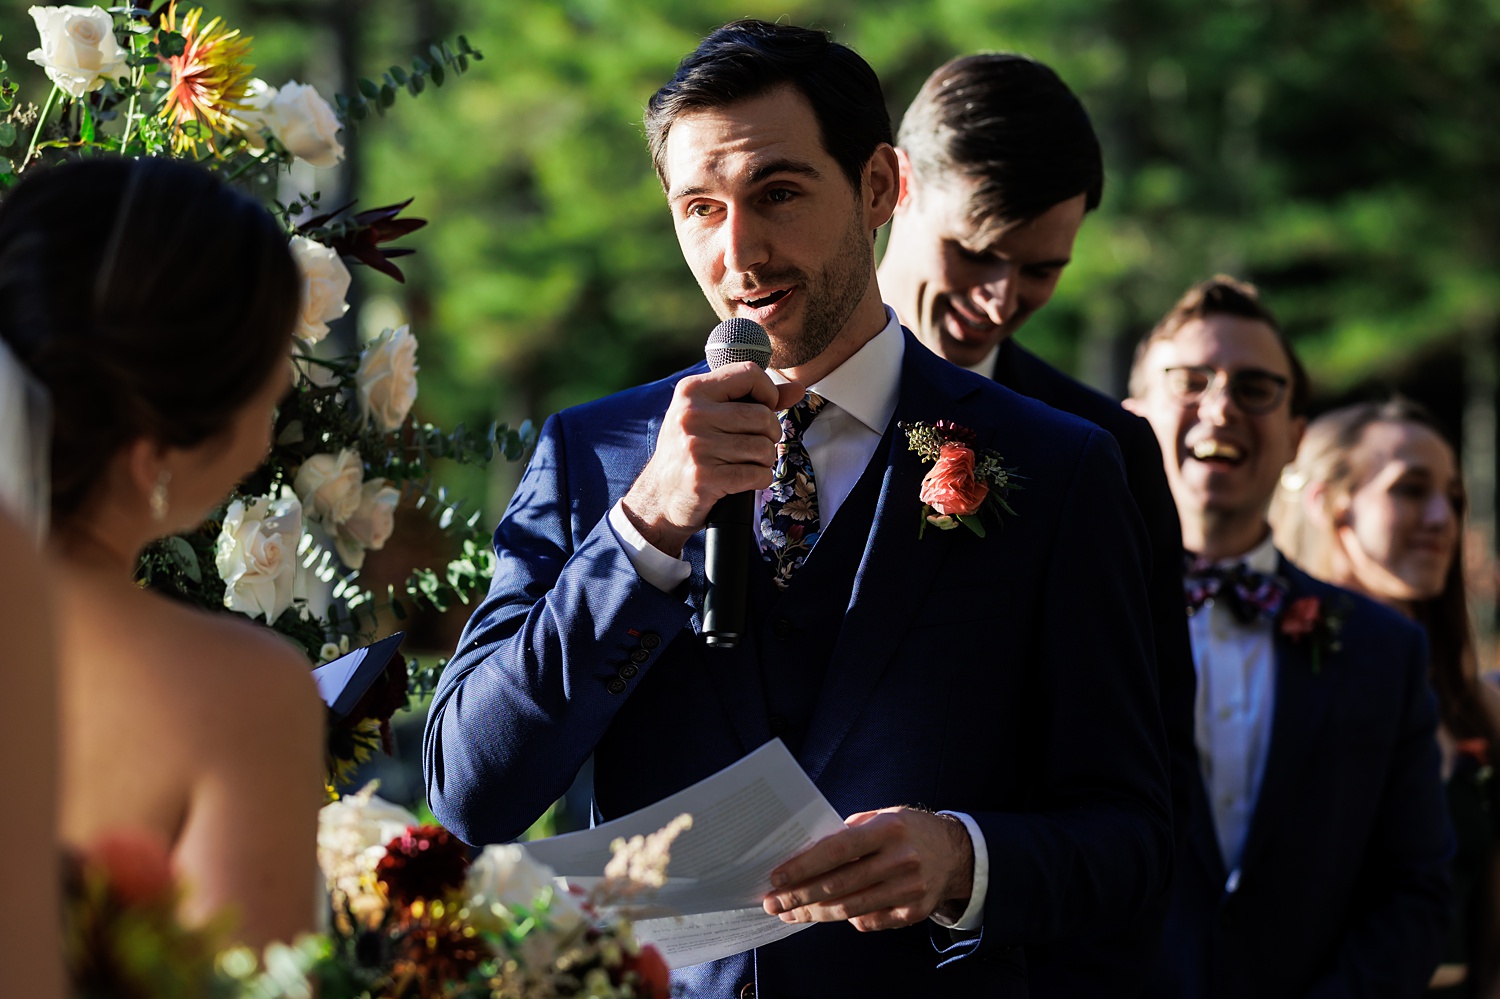 The groom reads his vows to his bride on their wedding day ceremony 